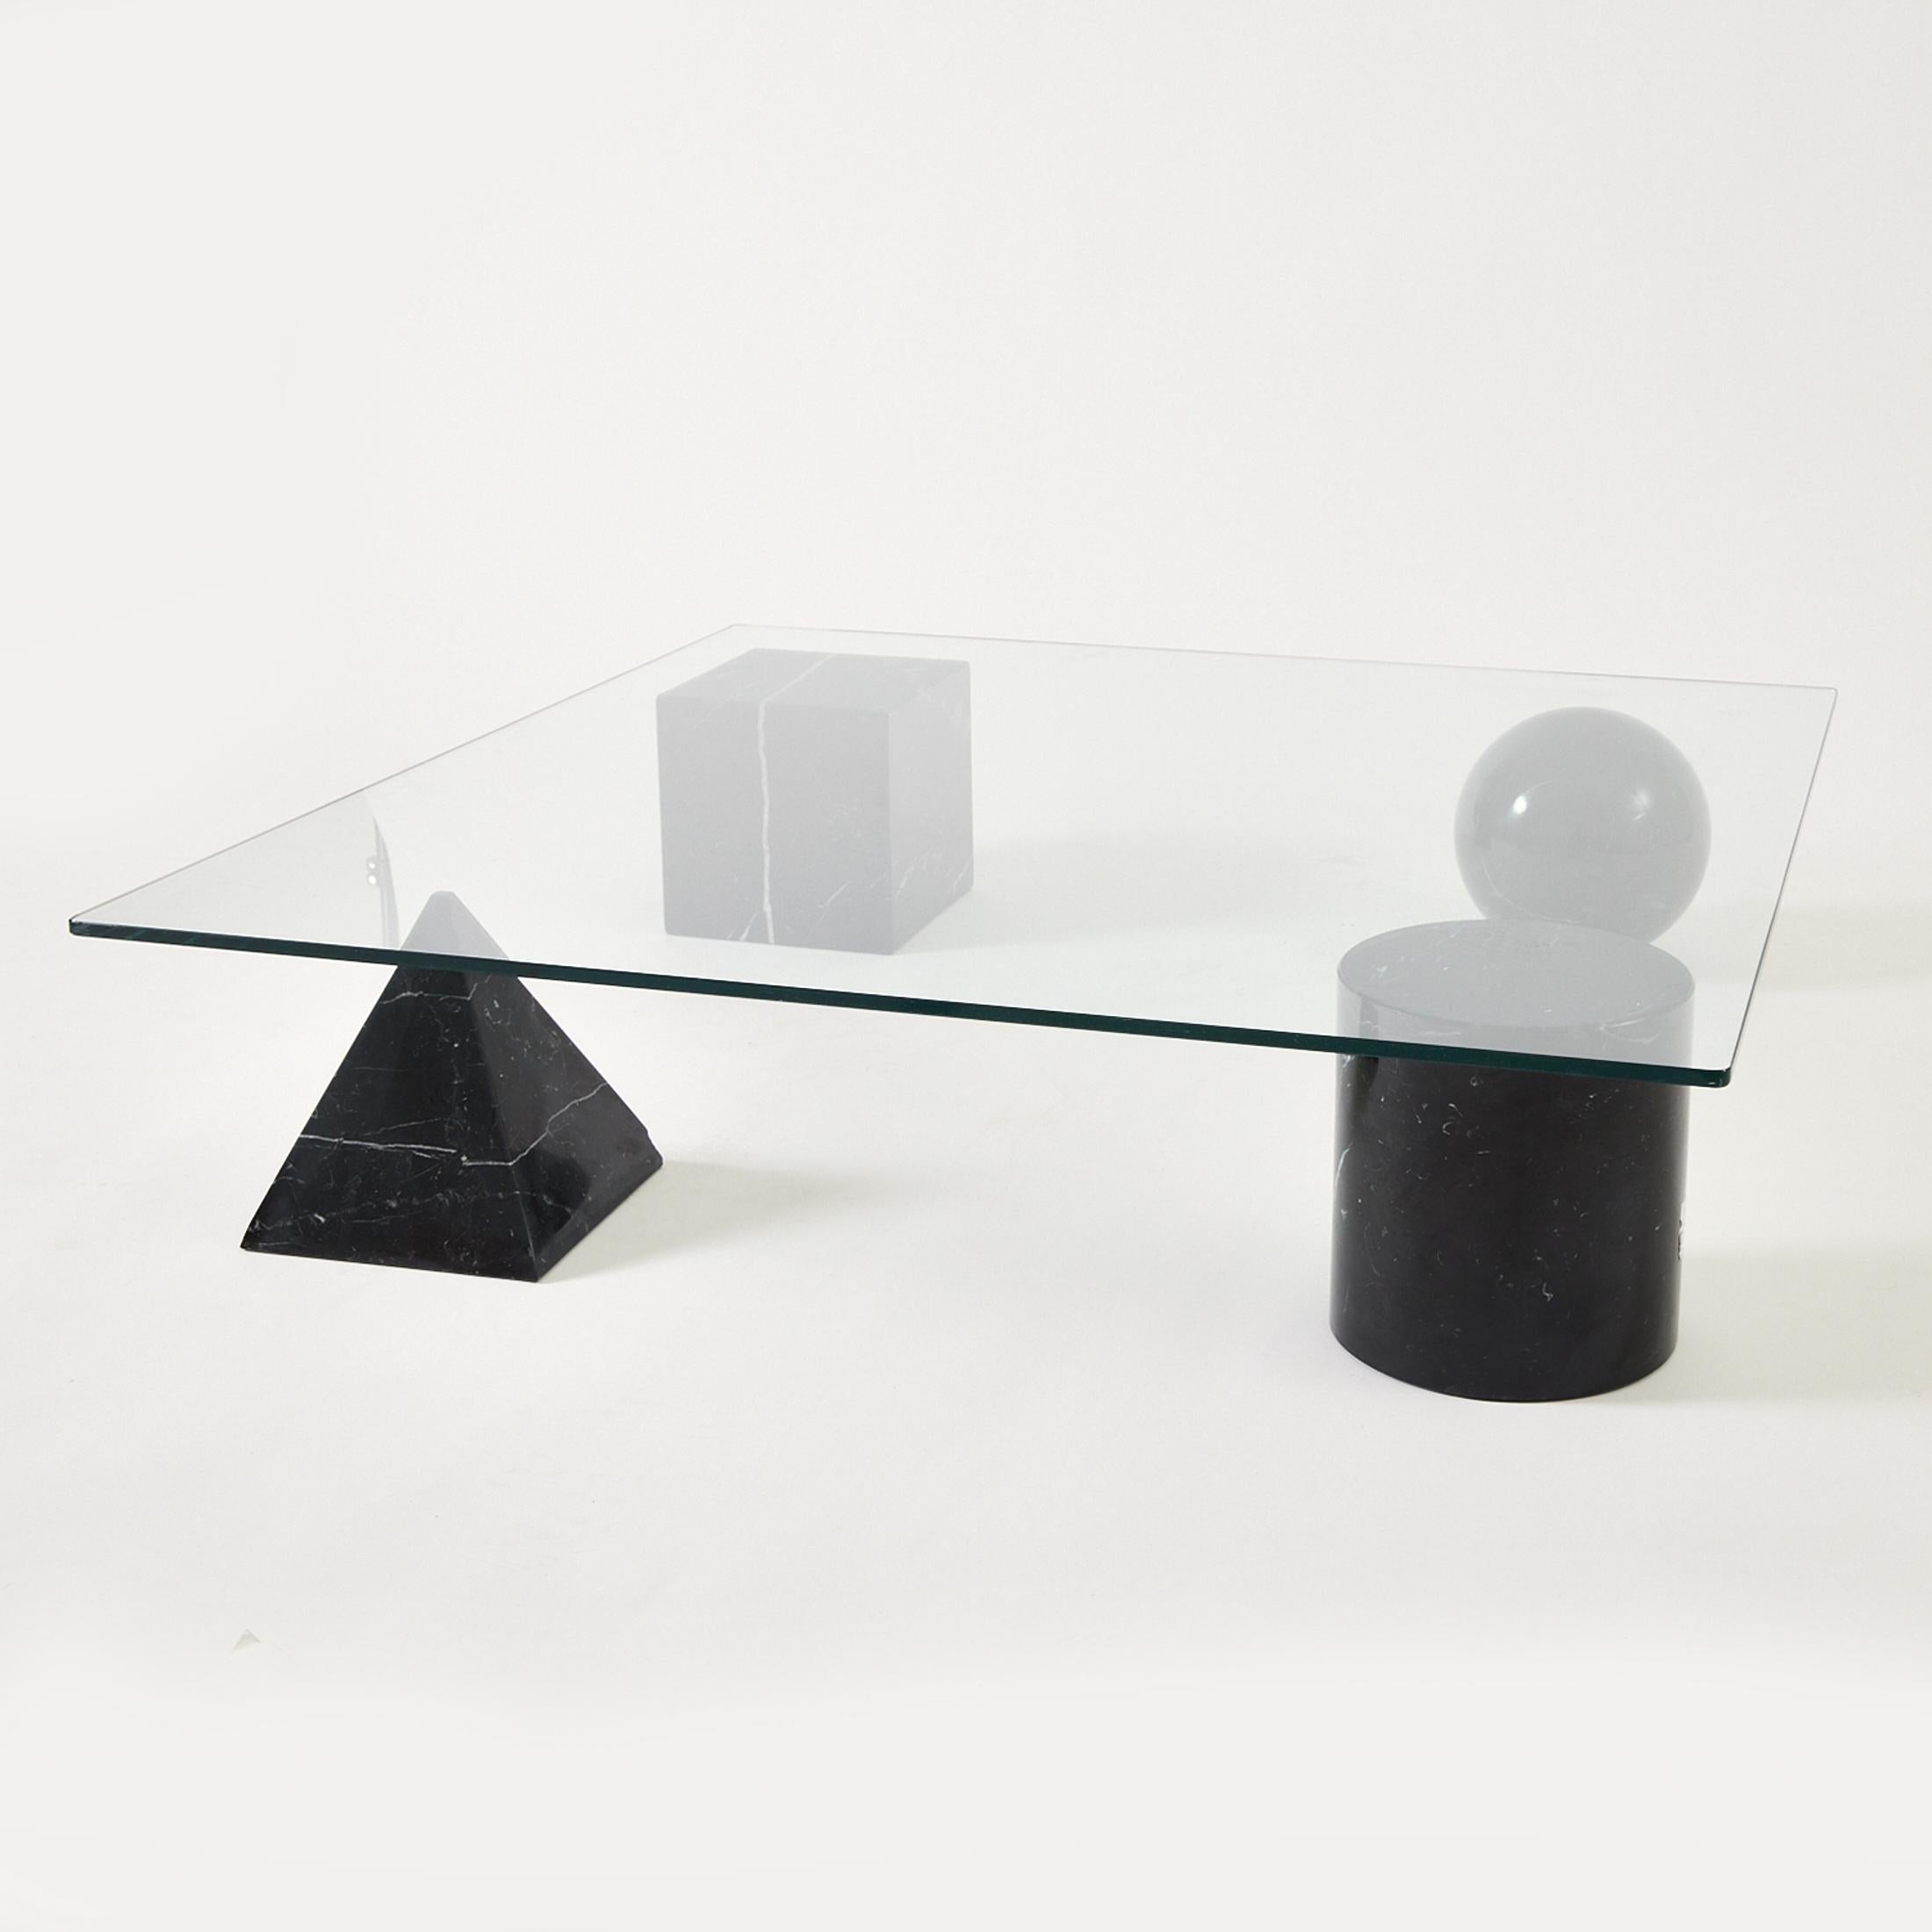 Post-Modern Metaphora Table by Massimo and Lella Vignello, 1979